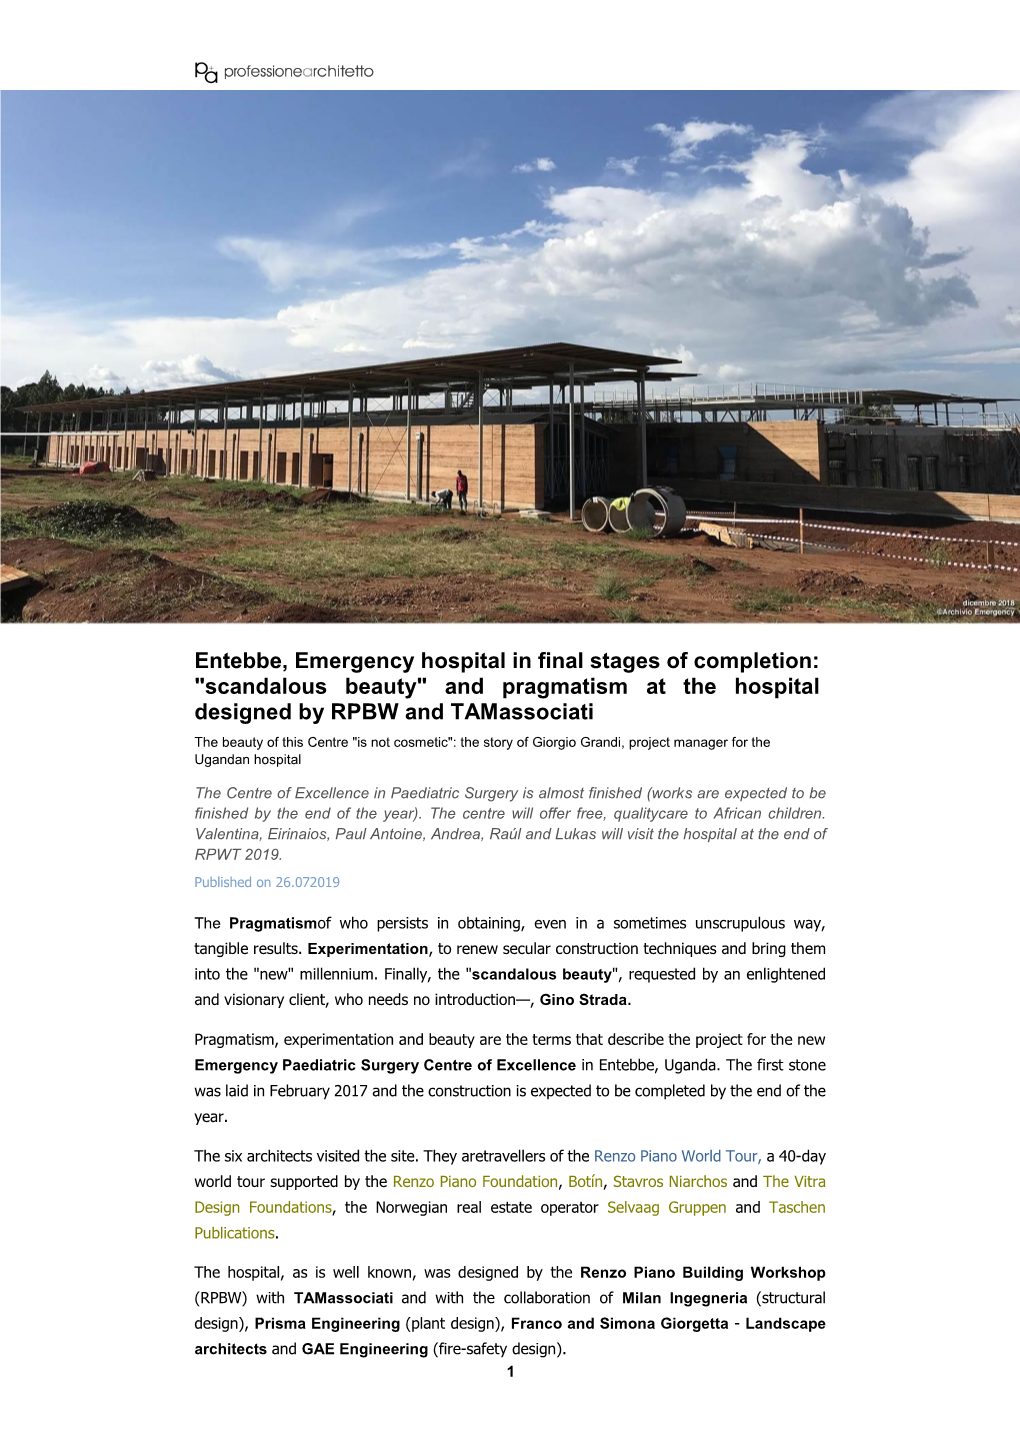 Entebbe, Emergency Hospital in Final Stages